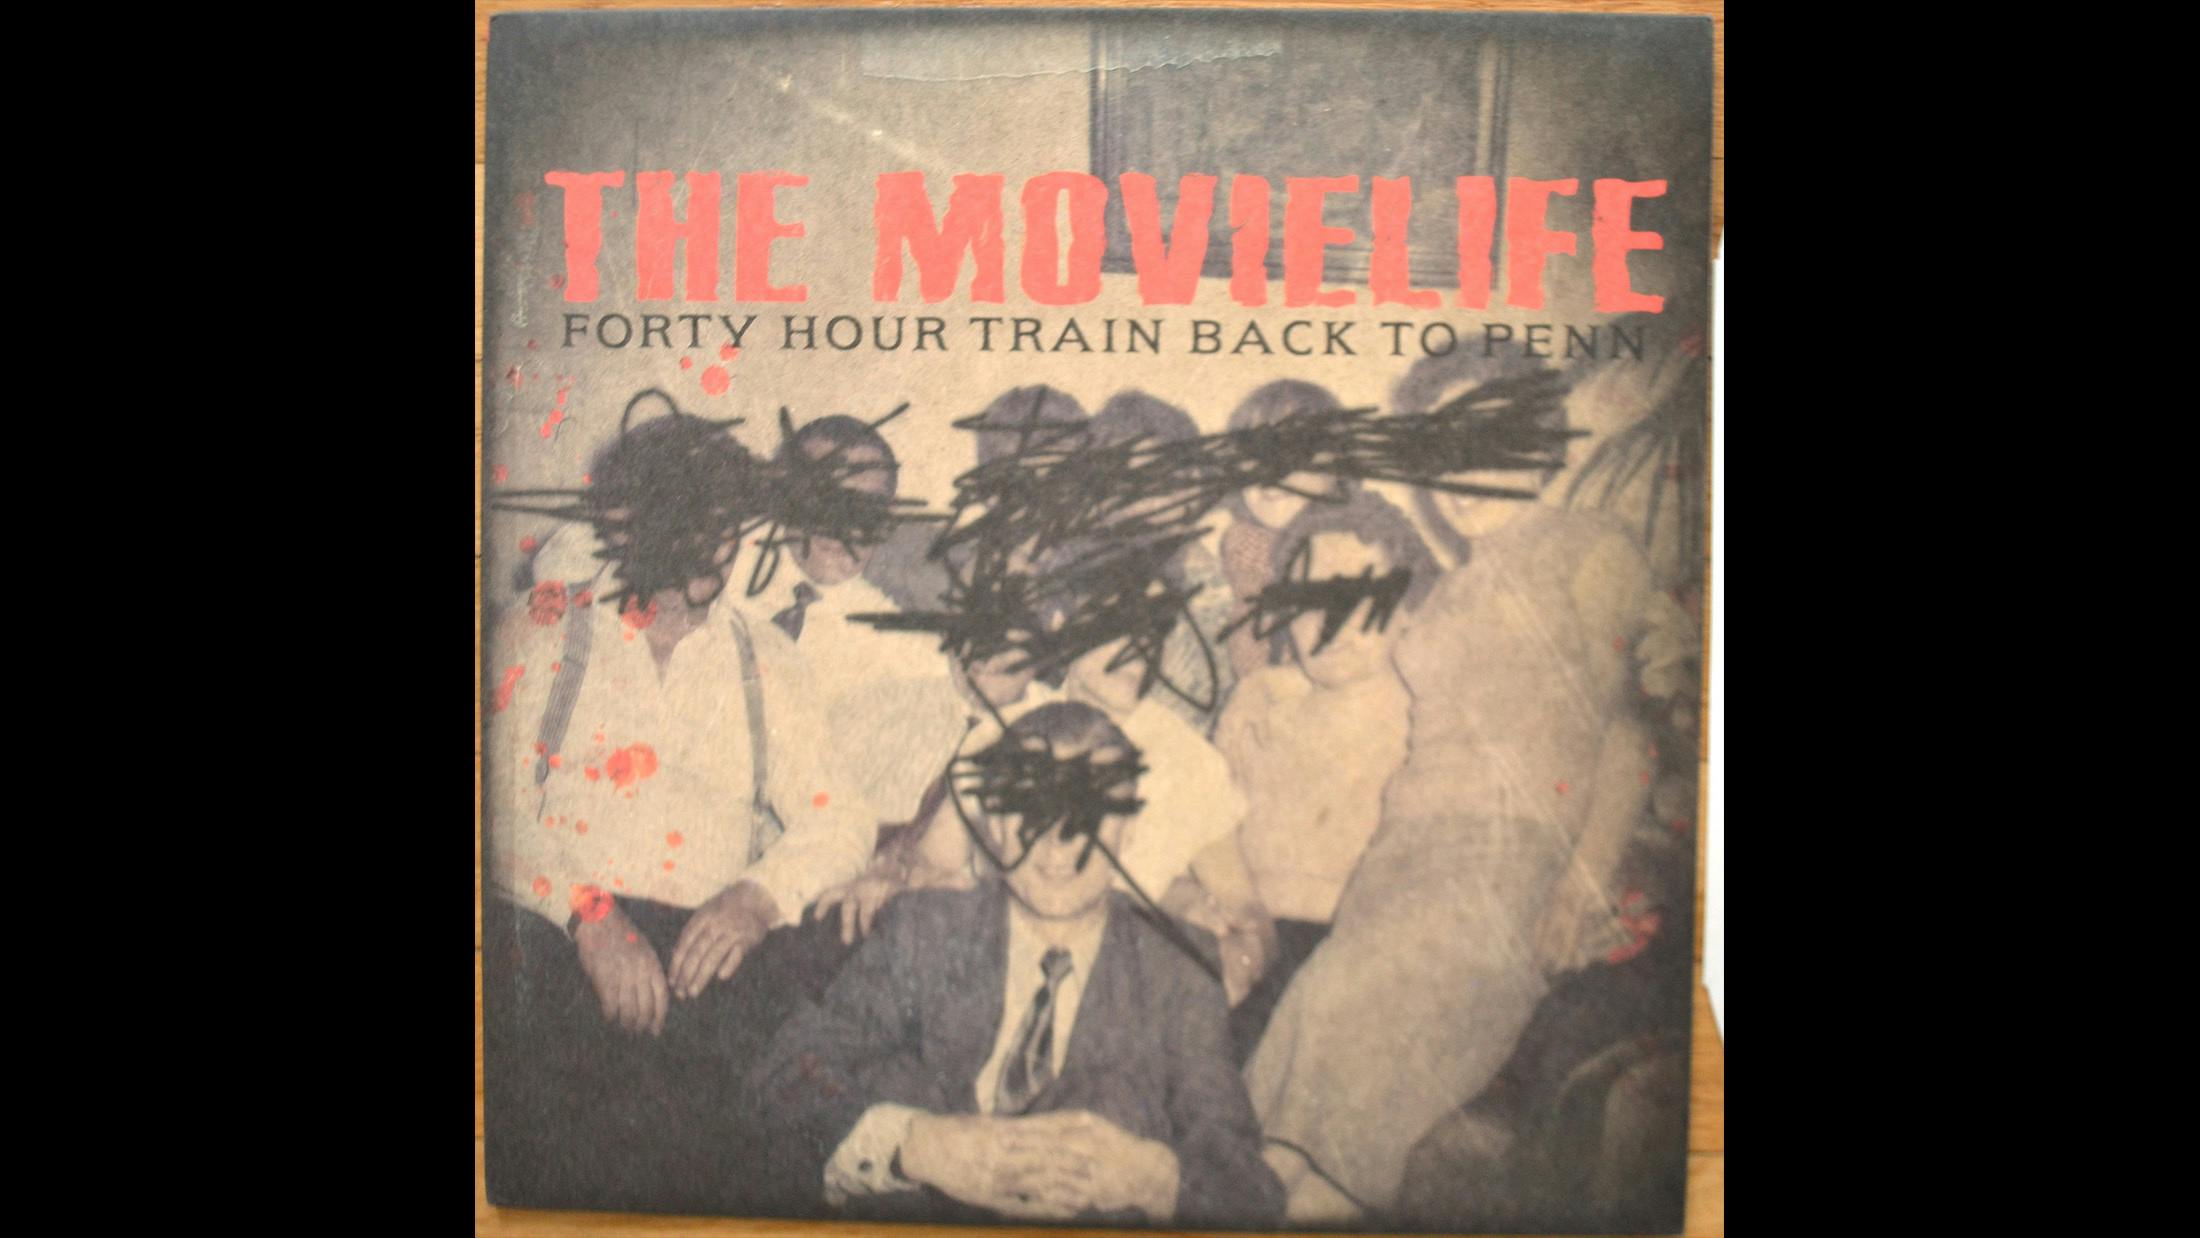 The Movielife’s original incarnation lasted just three albums and six years, but few bands on this list were more influential. Inspired by a near-fatal tour bus crash, this combined hardcore rasp with pop-punk hooks in a way that few others were back in 2003.